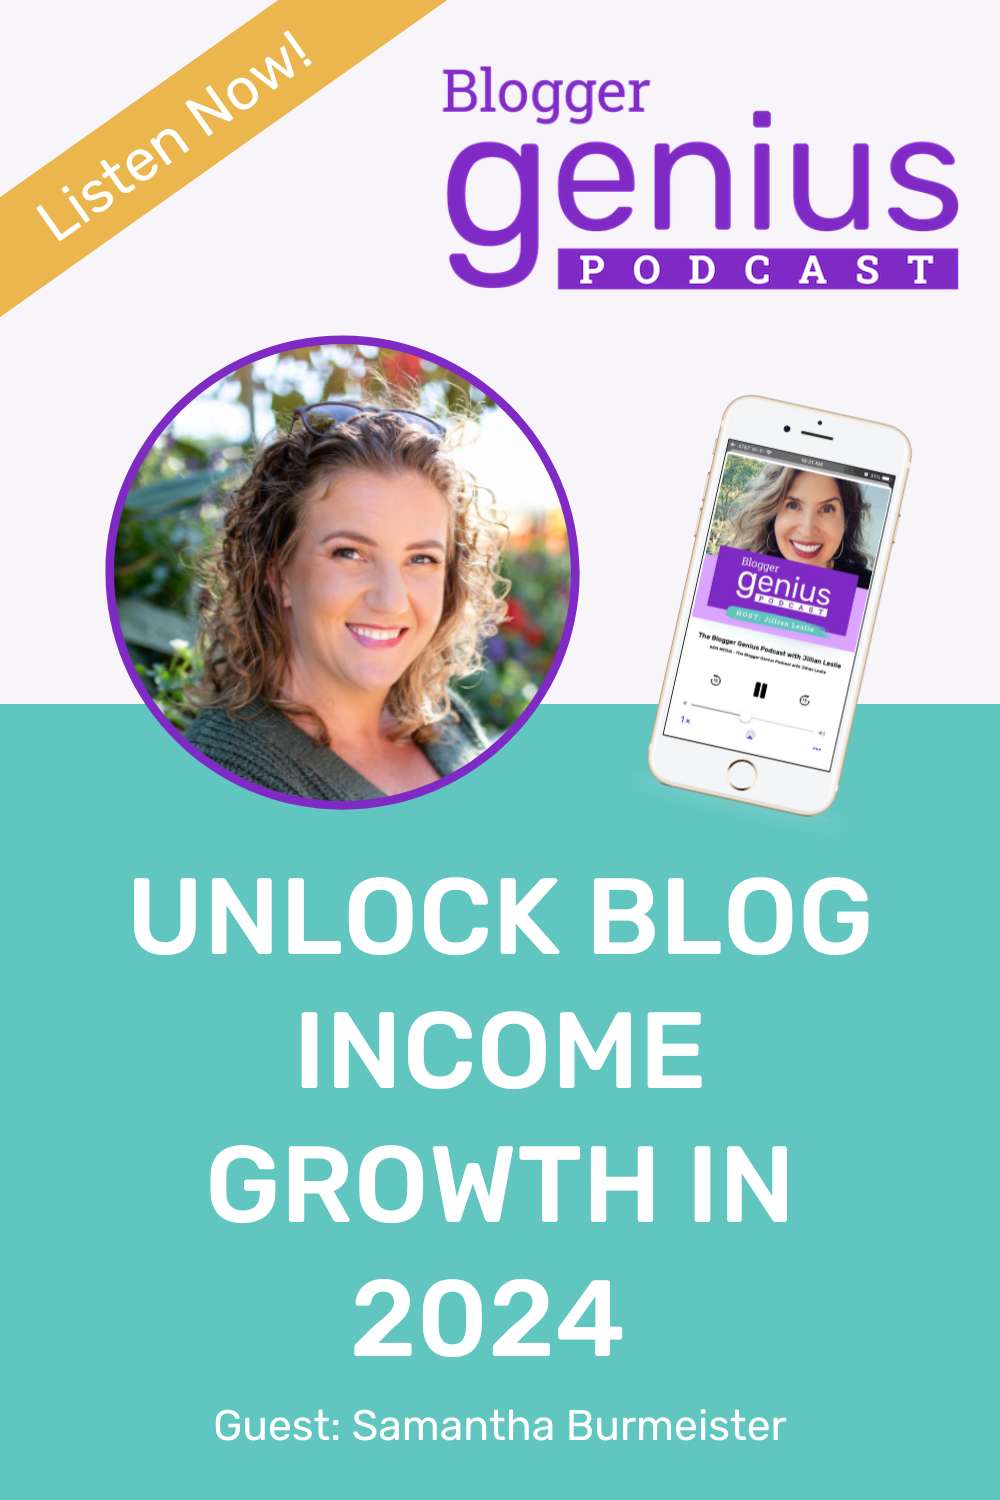 Mastering the Art of Messaging to Unlock Income Growth in 2024 | The Blogger Genius Podcast with Jillian Leslie